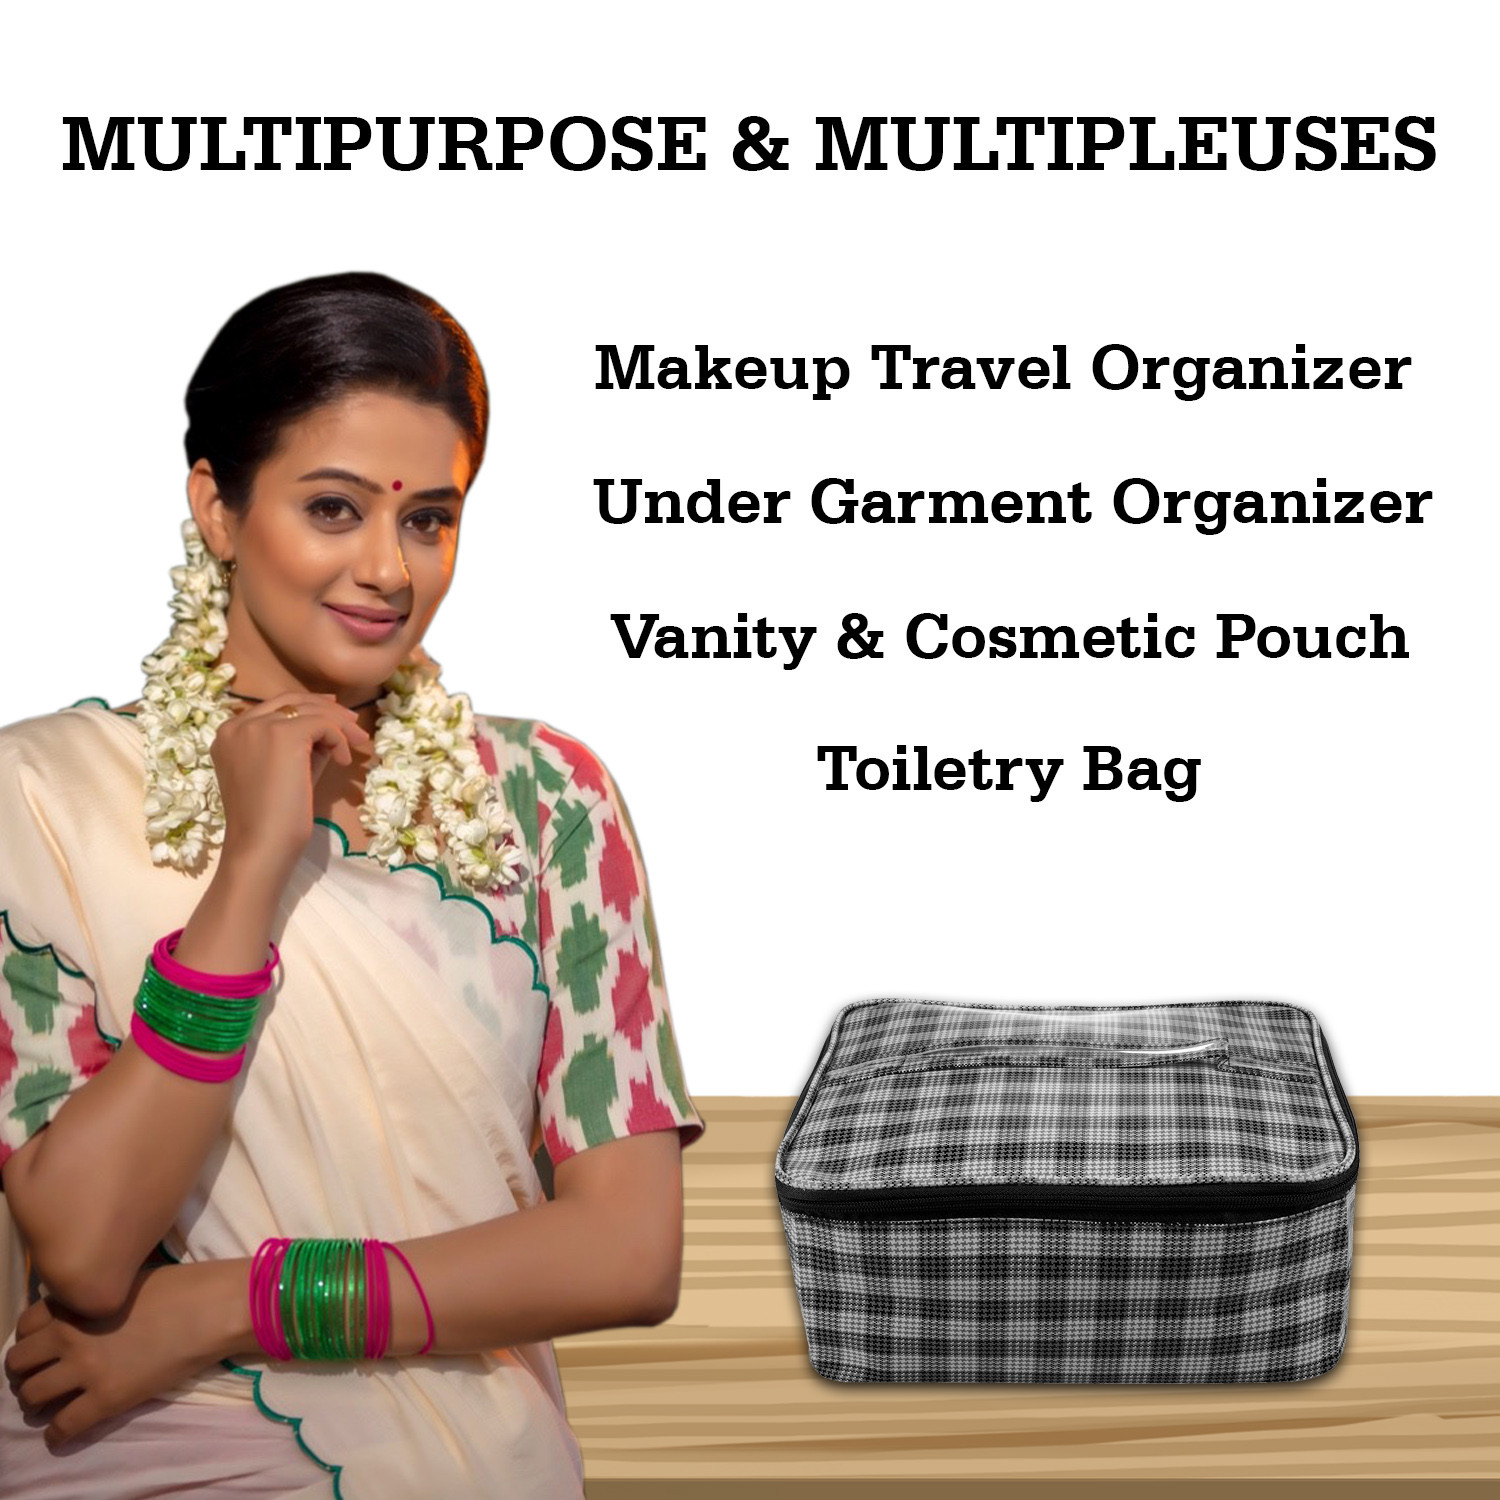 Kuber Industries Under Garment Kit|Rexine Makeup Travel Organizer|Check Print Vanity & Cosmetic Pouch|Toiletry Bag with Handle for Men & Women|Pack of 2 (Turquoise & Grey)